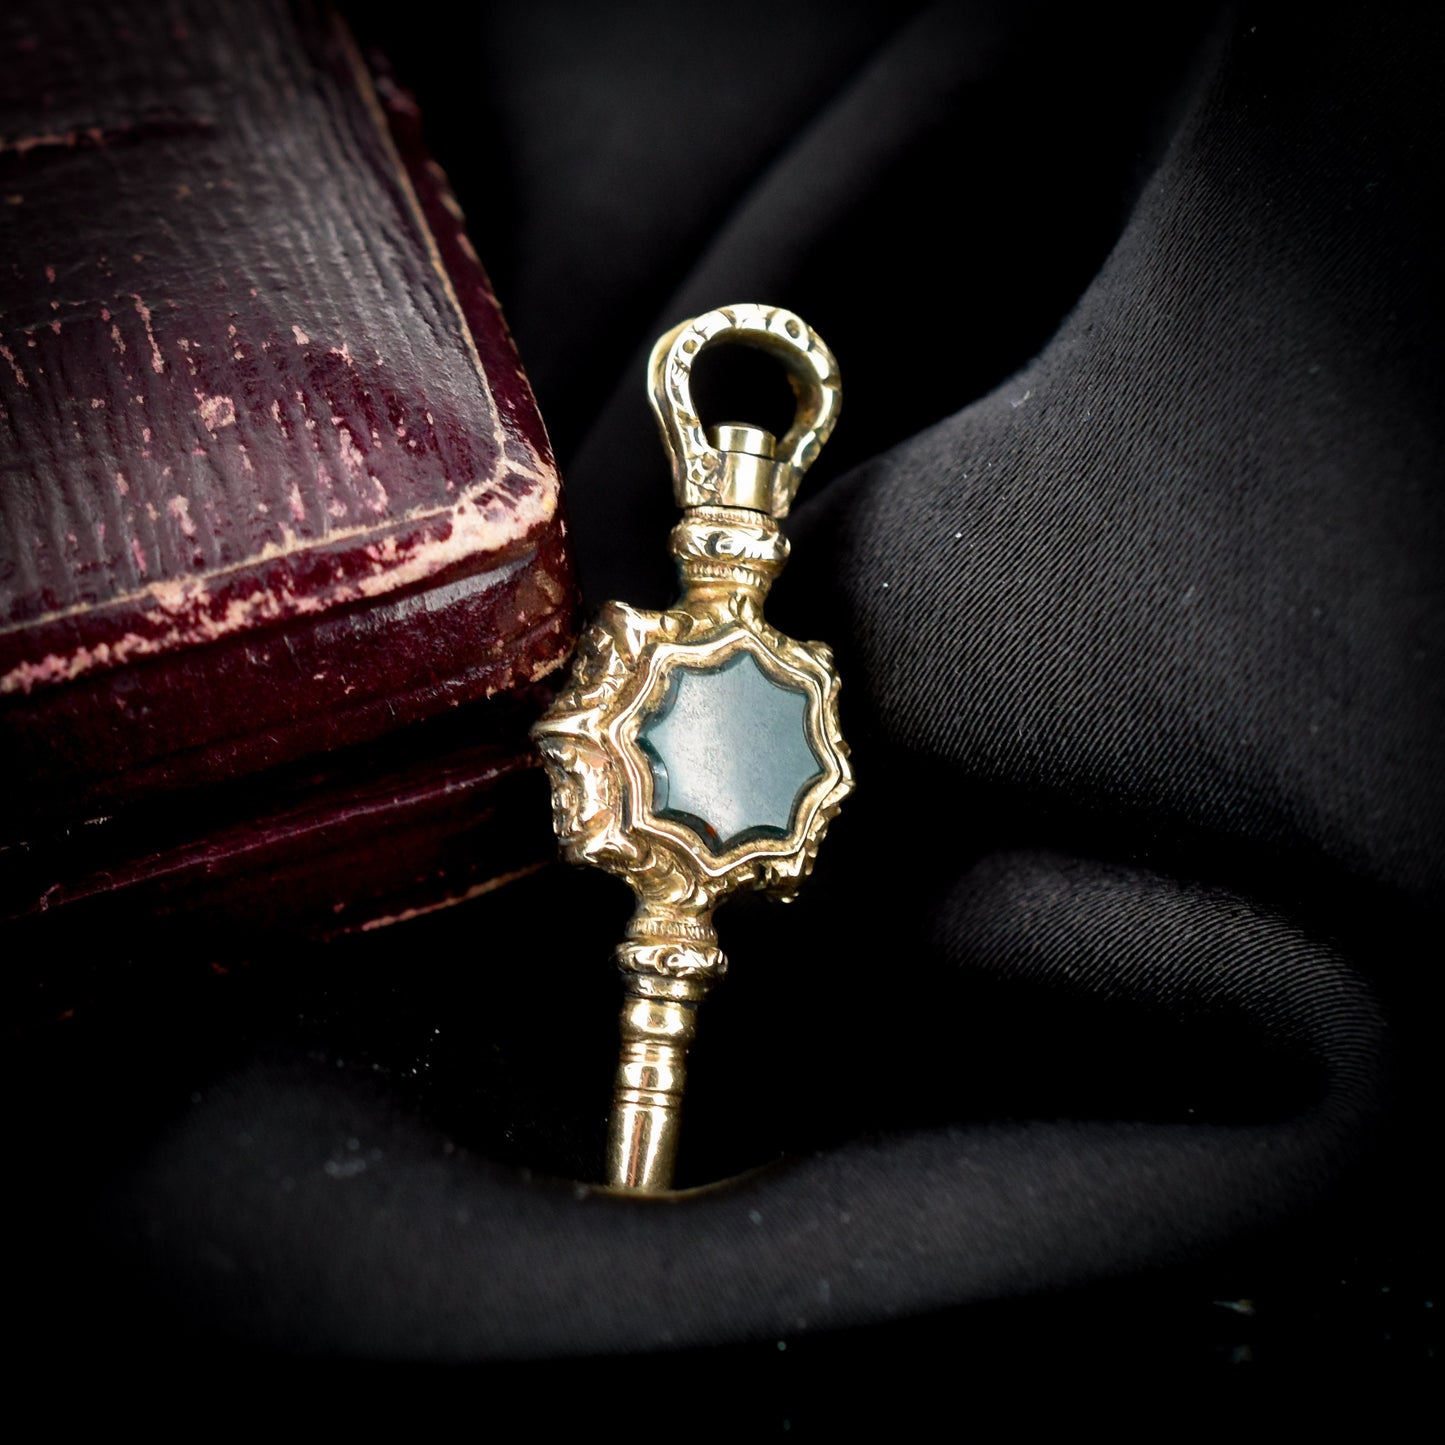 Antique Bloodstone and Chalcedony Gold Watch Key Fob Pendant Charm